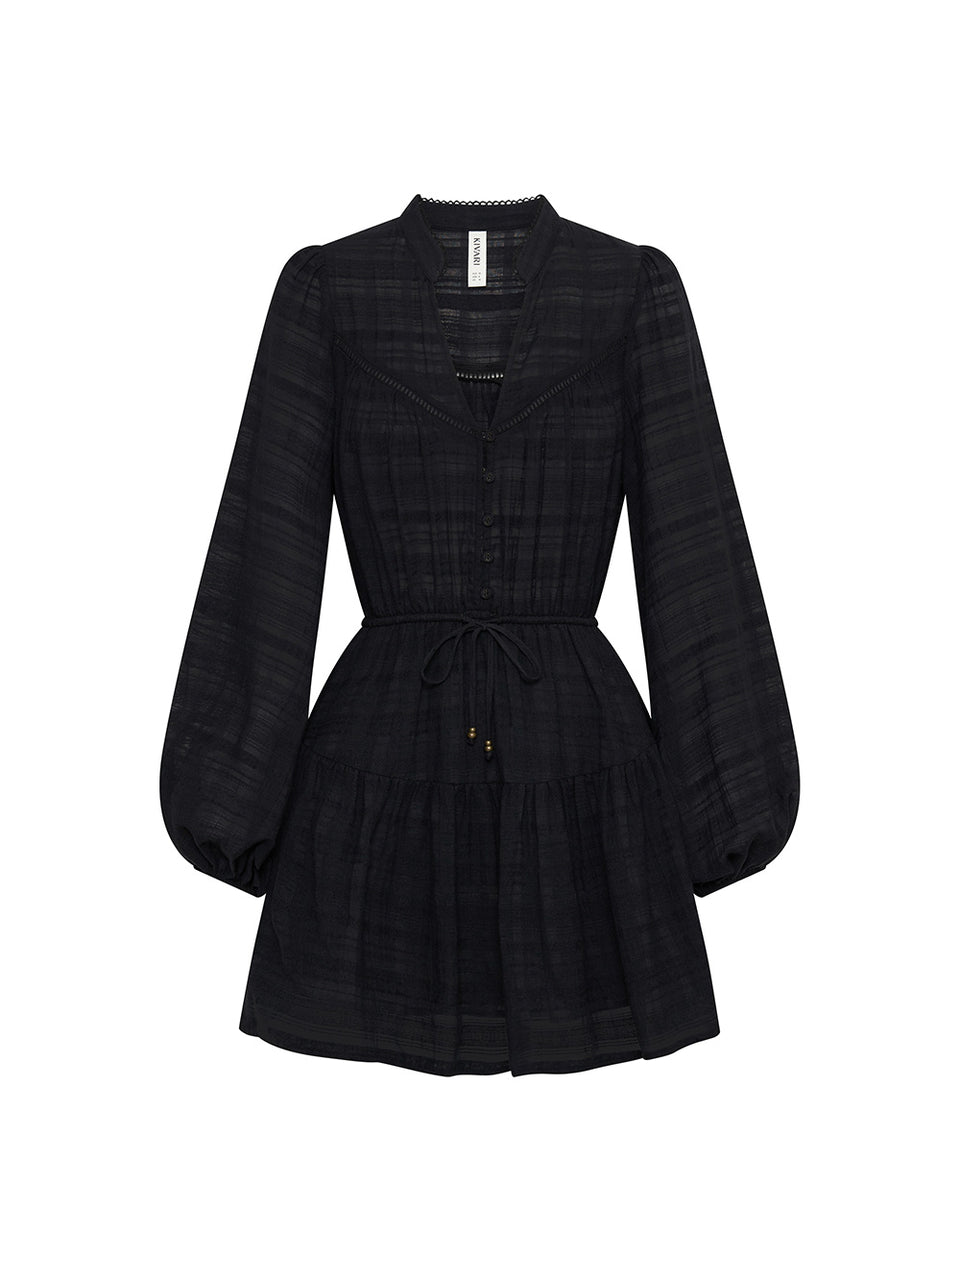 Ghost image of KIVARI Rafaelle Mini Dress: a black dress made from cotton check featuring a button-front bodice, full-length blouson sleeves, drawstring waist and gathered hem frill.